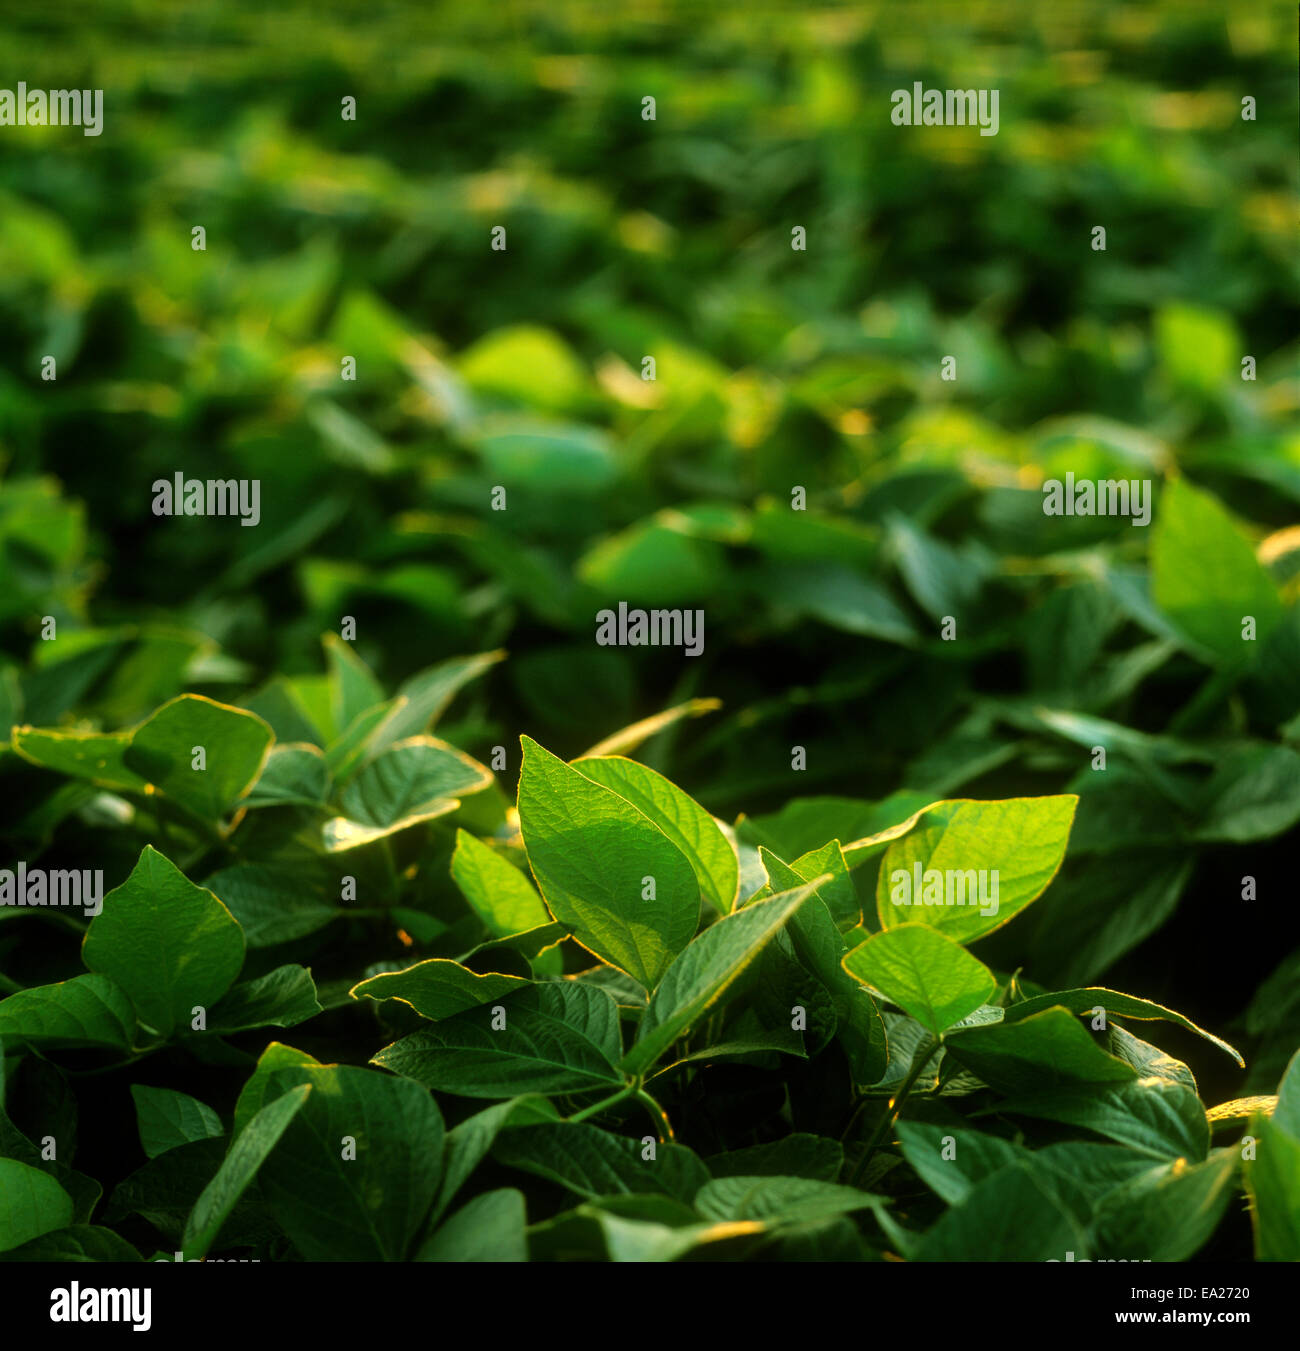 Agriculture - Closeup of mid growth soybean foliage / Ontario, Canada. Stock Photo